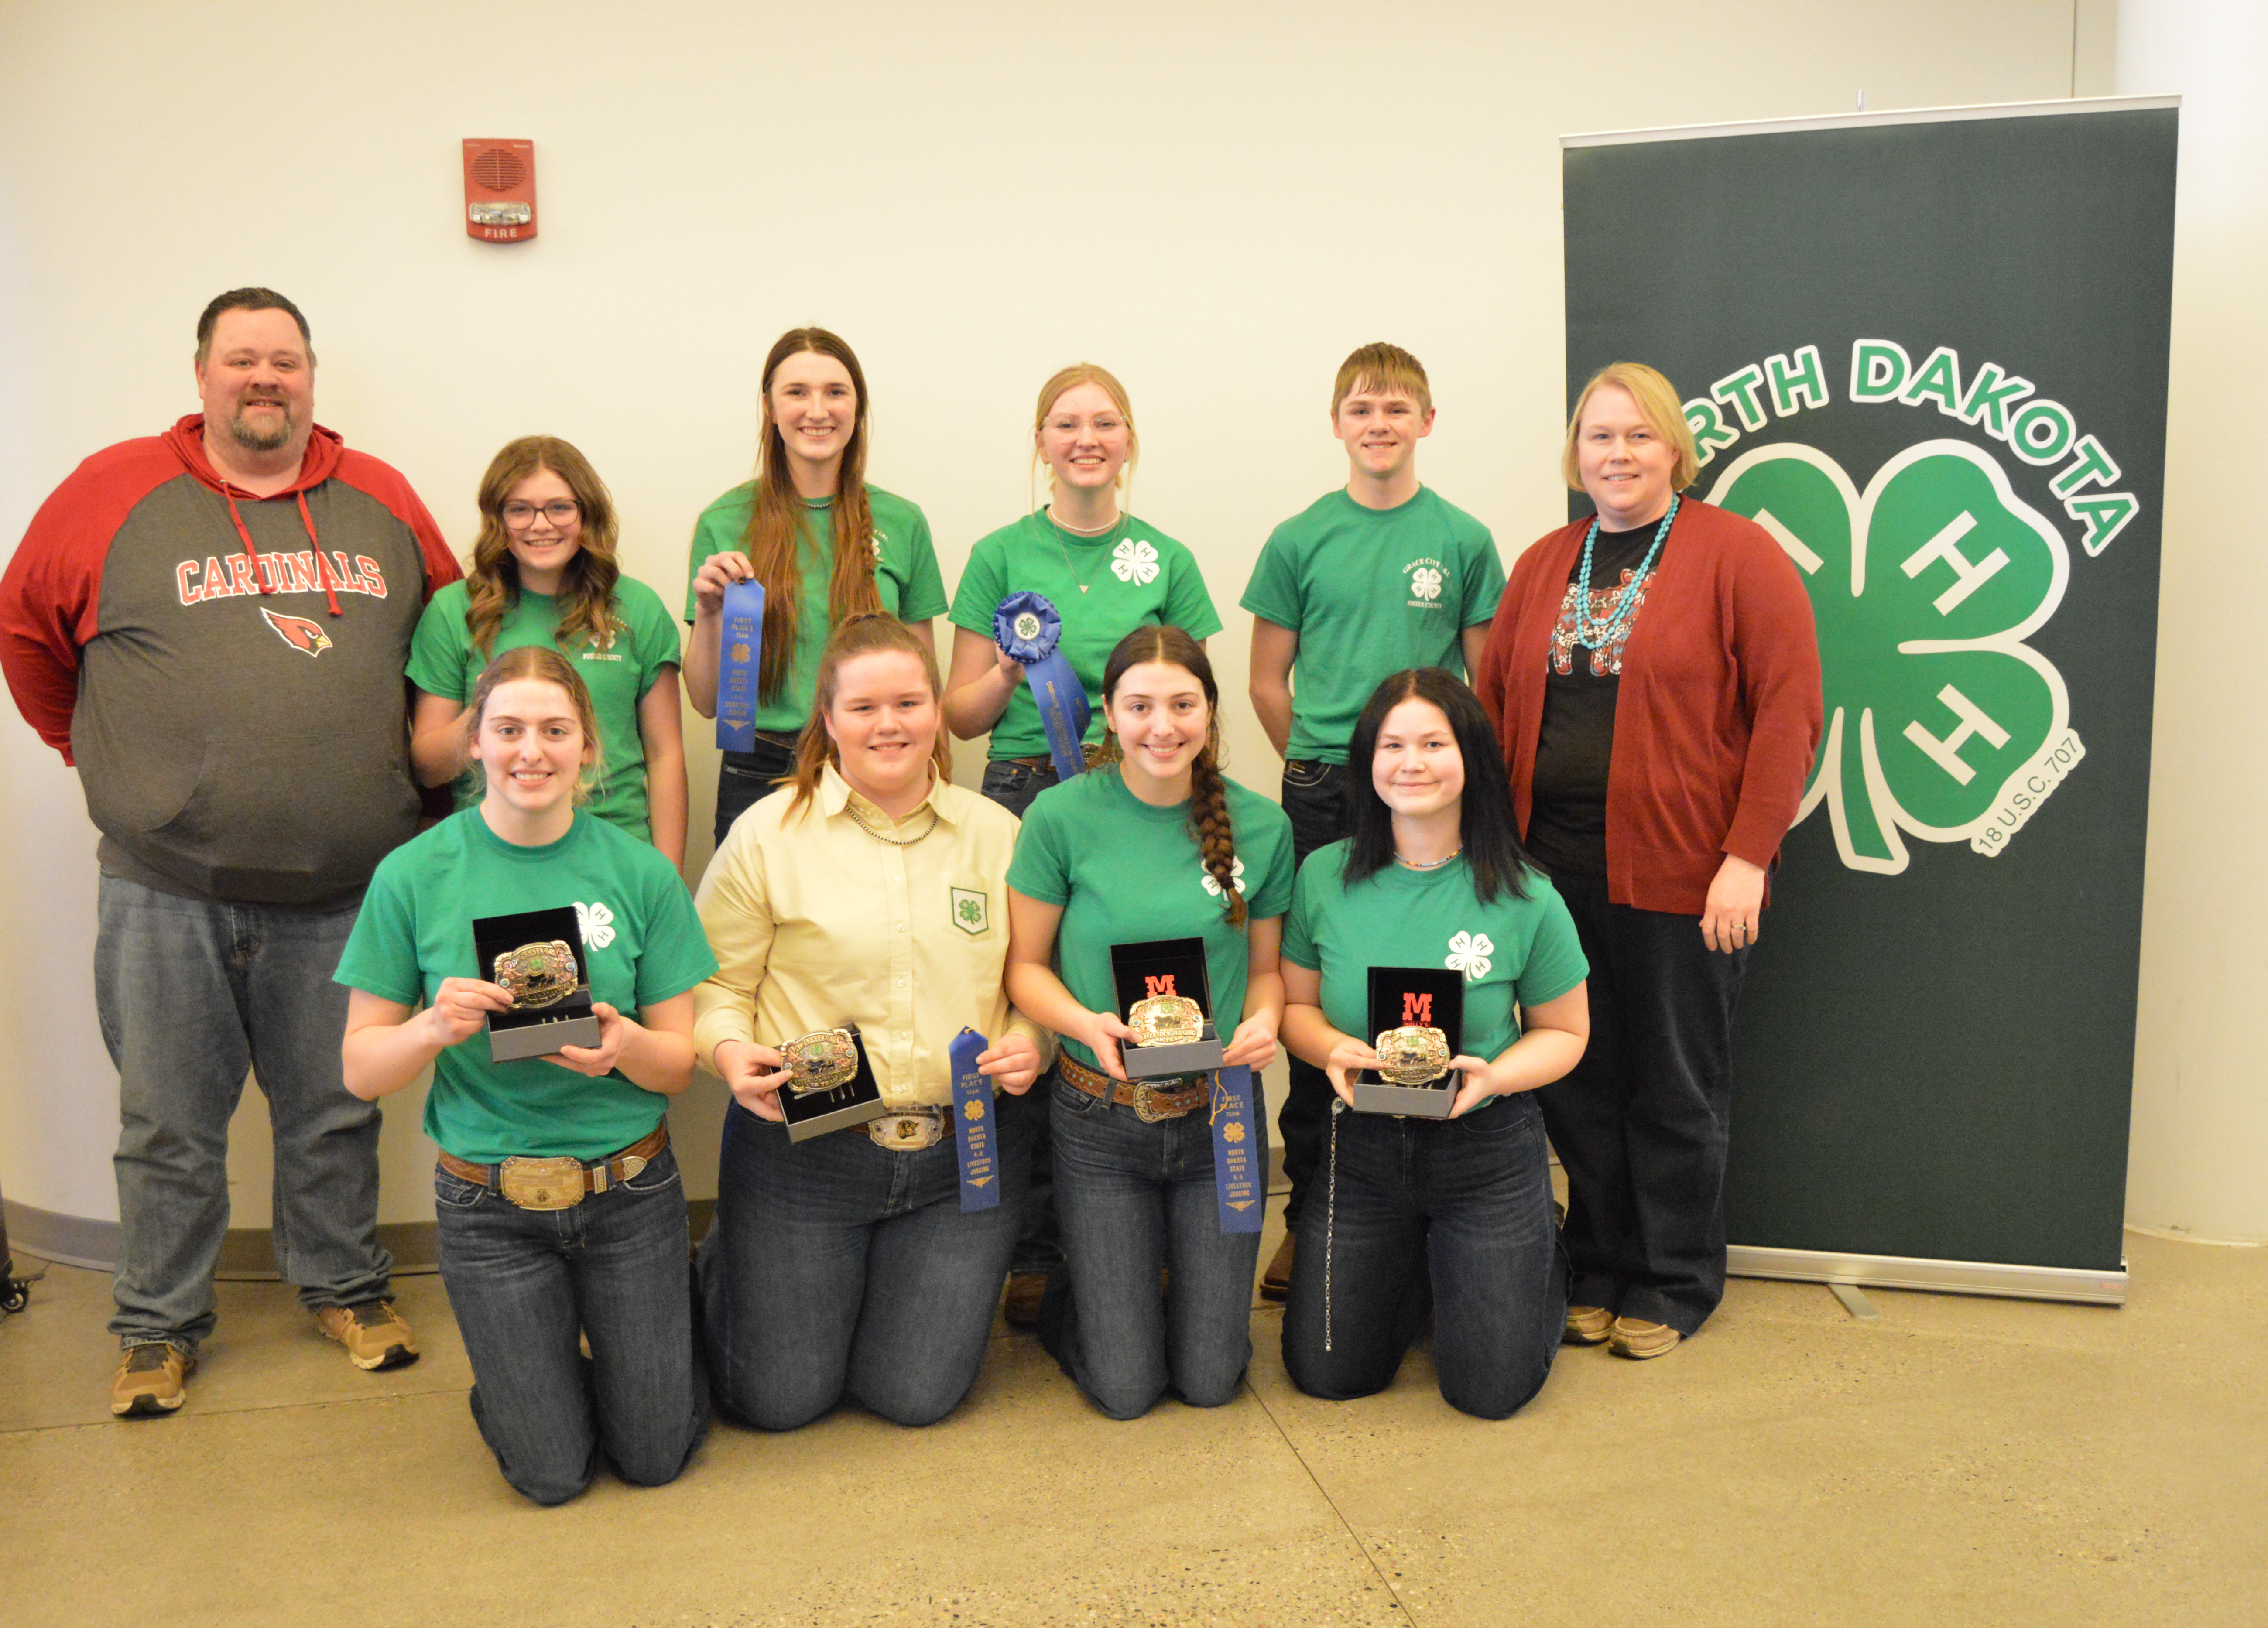 The Foster County team took first place in the senior division of the North Dakota 4-H State Livestock Judging Contest. Team members are (from left, front row) Kennedy Wendel, Molly Hansen, Isabel Wendel, Karlee Lesmann and (from left, back row) Coach Jory Hansen, Emma Aberle, Jozey Retzlaff, Haylie Spickler, Trace Spickler, Coach Missy Hansen (NDSU photo)